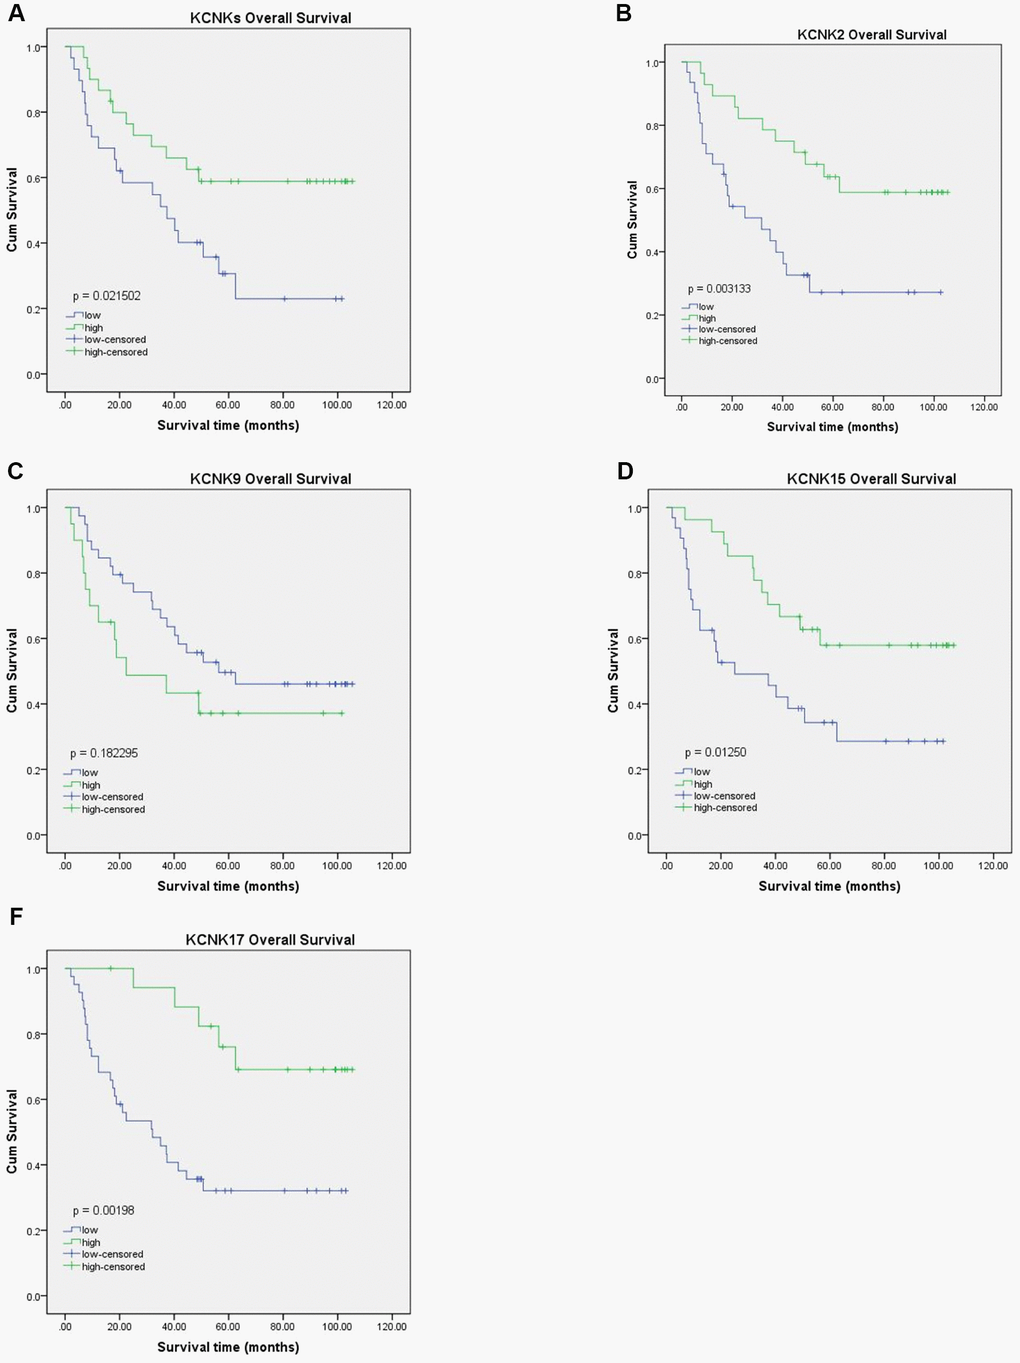 Prognostic value of KCNK2, KCNK9, KCNK15, and KCNK17 mRNA levels in HCC patients. Increased KCNK2, KCNK15, and KCNK17 mRNA levels correlated with favorable OS of HCC patients (B, D, F). KCNK9 mRNA levels showed no correlation with HCC patient prognosis (C). Mean KCNK2/9/15/17 levels showed prognostic value in patients with HCC, with higher levels suggesting better prognosis (A).